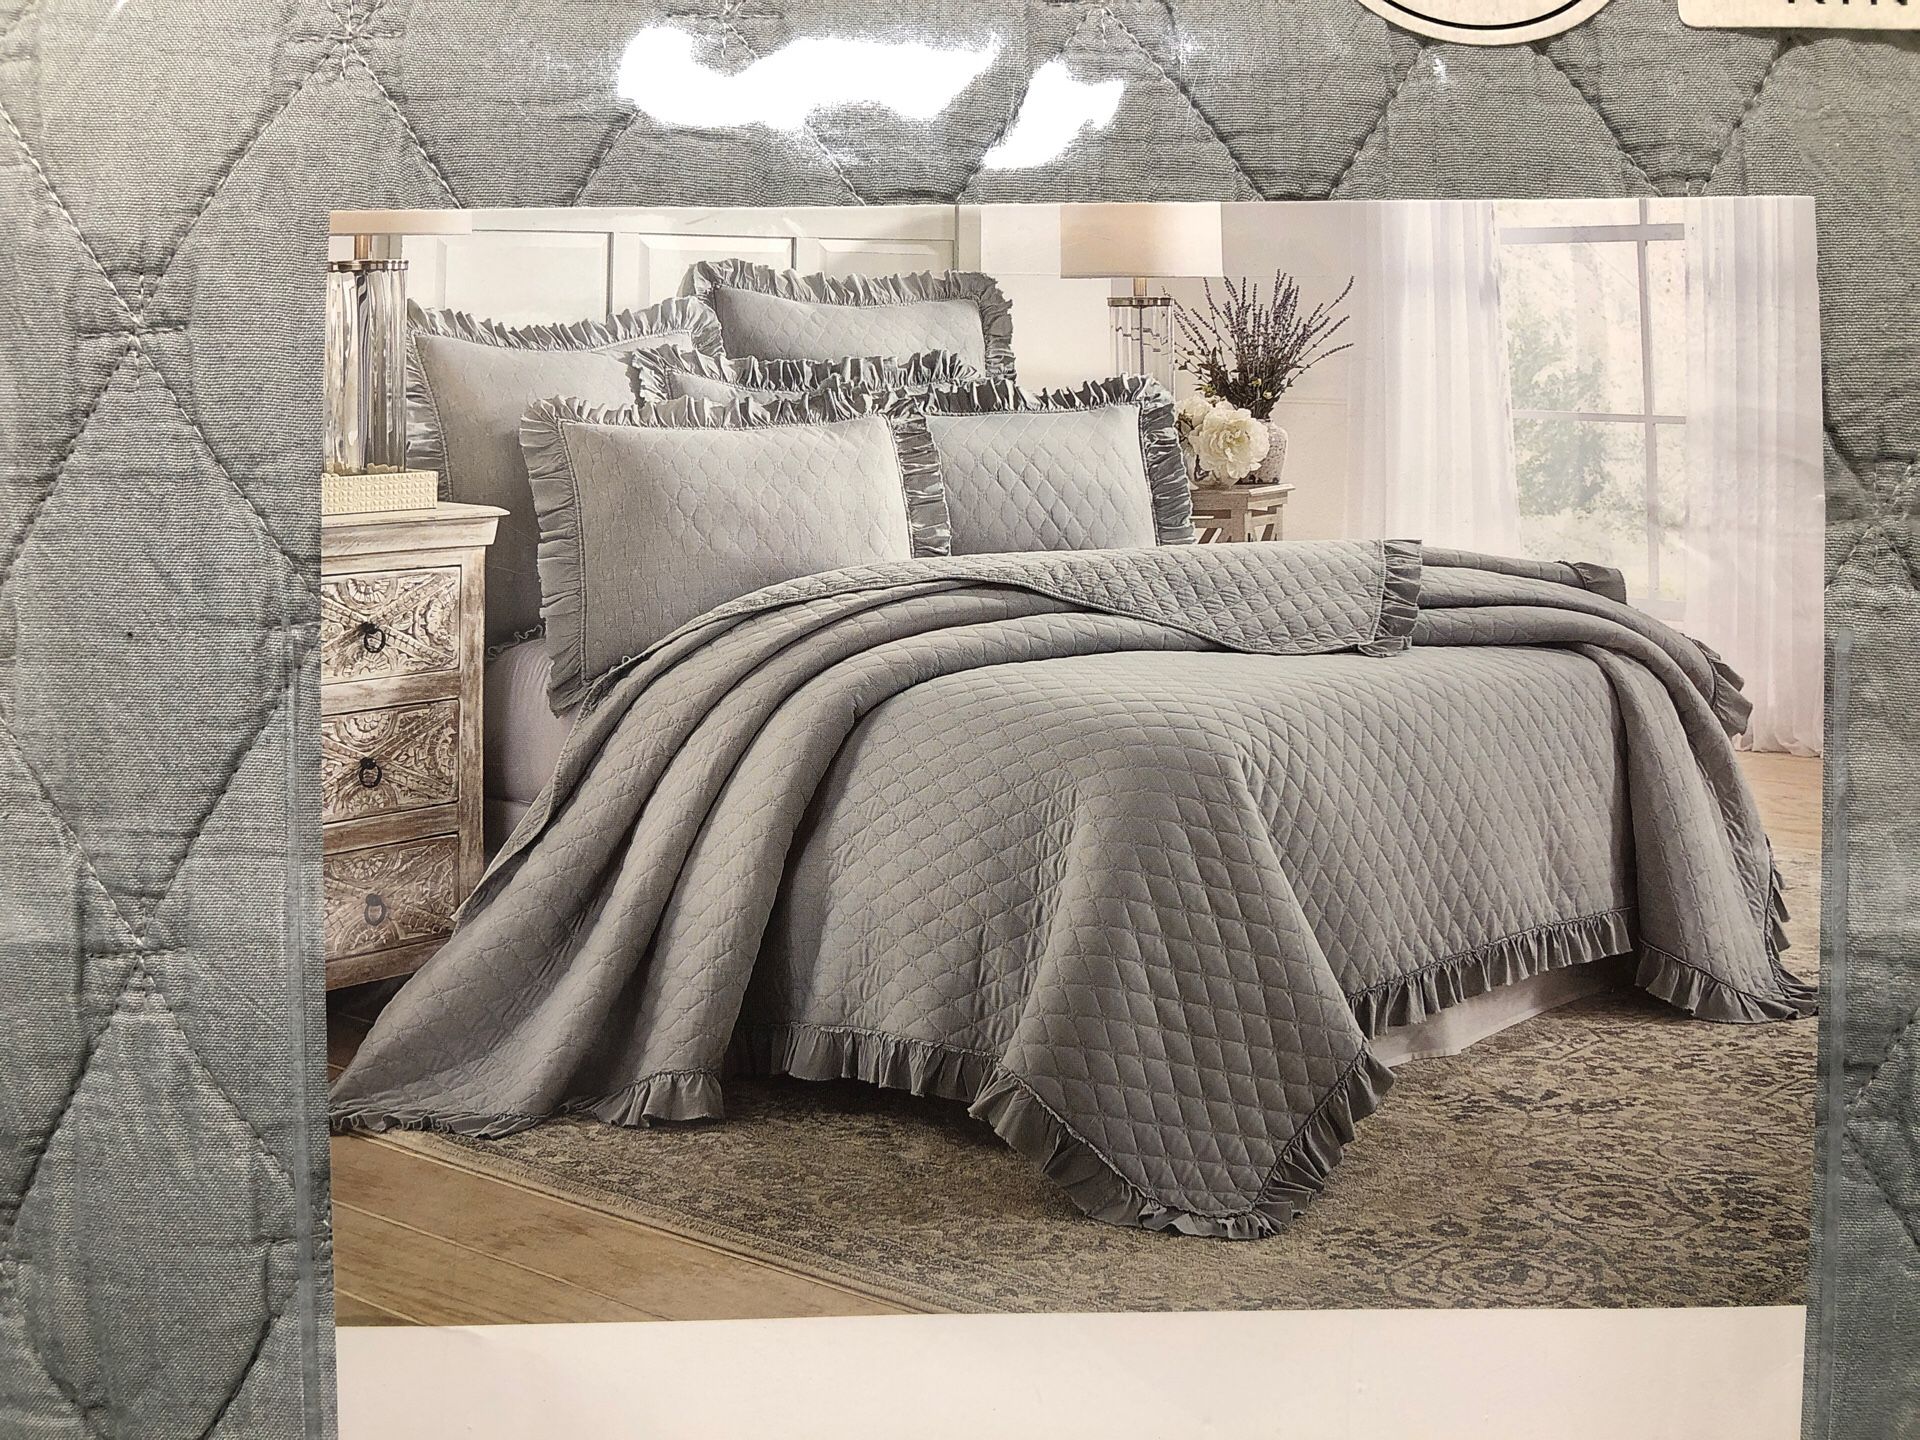 New King Size Quilt Set with Pillow Shams Levtex Home “Sandwashed”